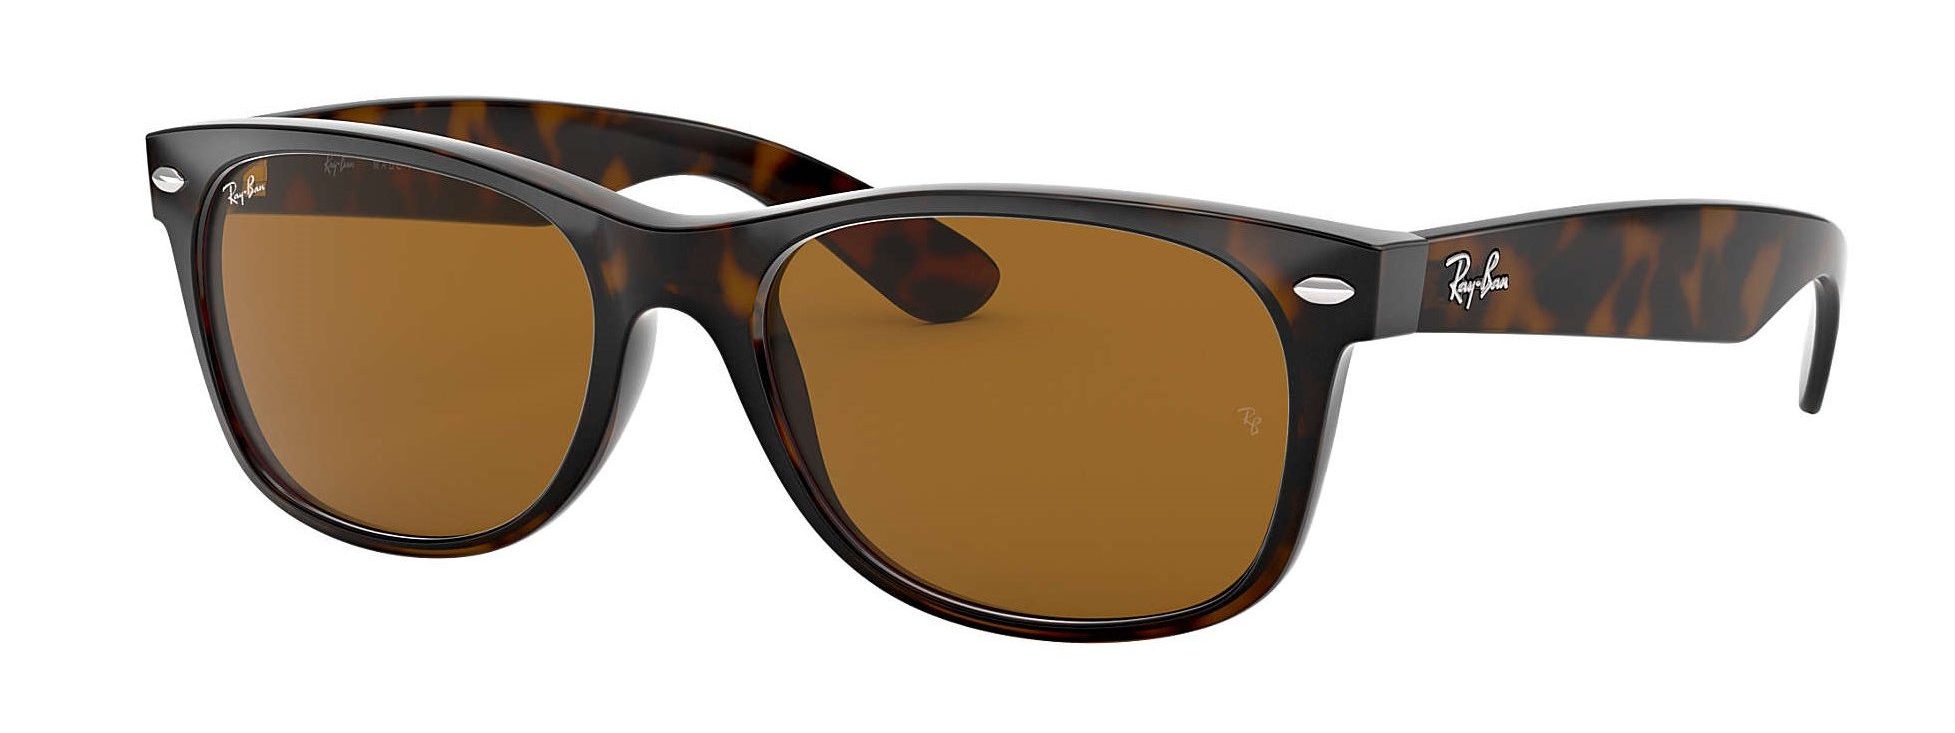 Ray-Ban RB2132 New Wayfarer in Tortoise Brown with B-15 Brown Lenses